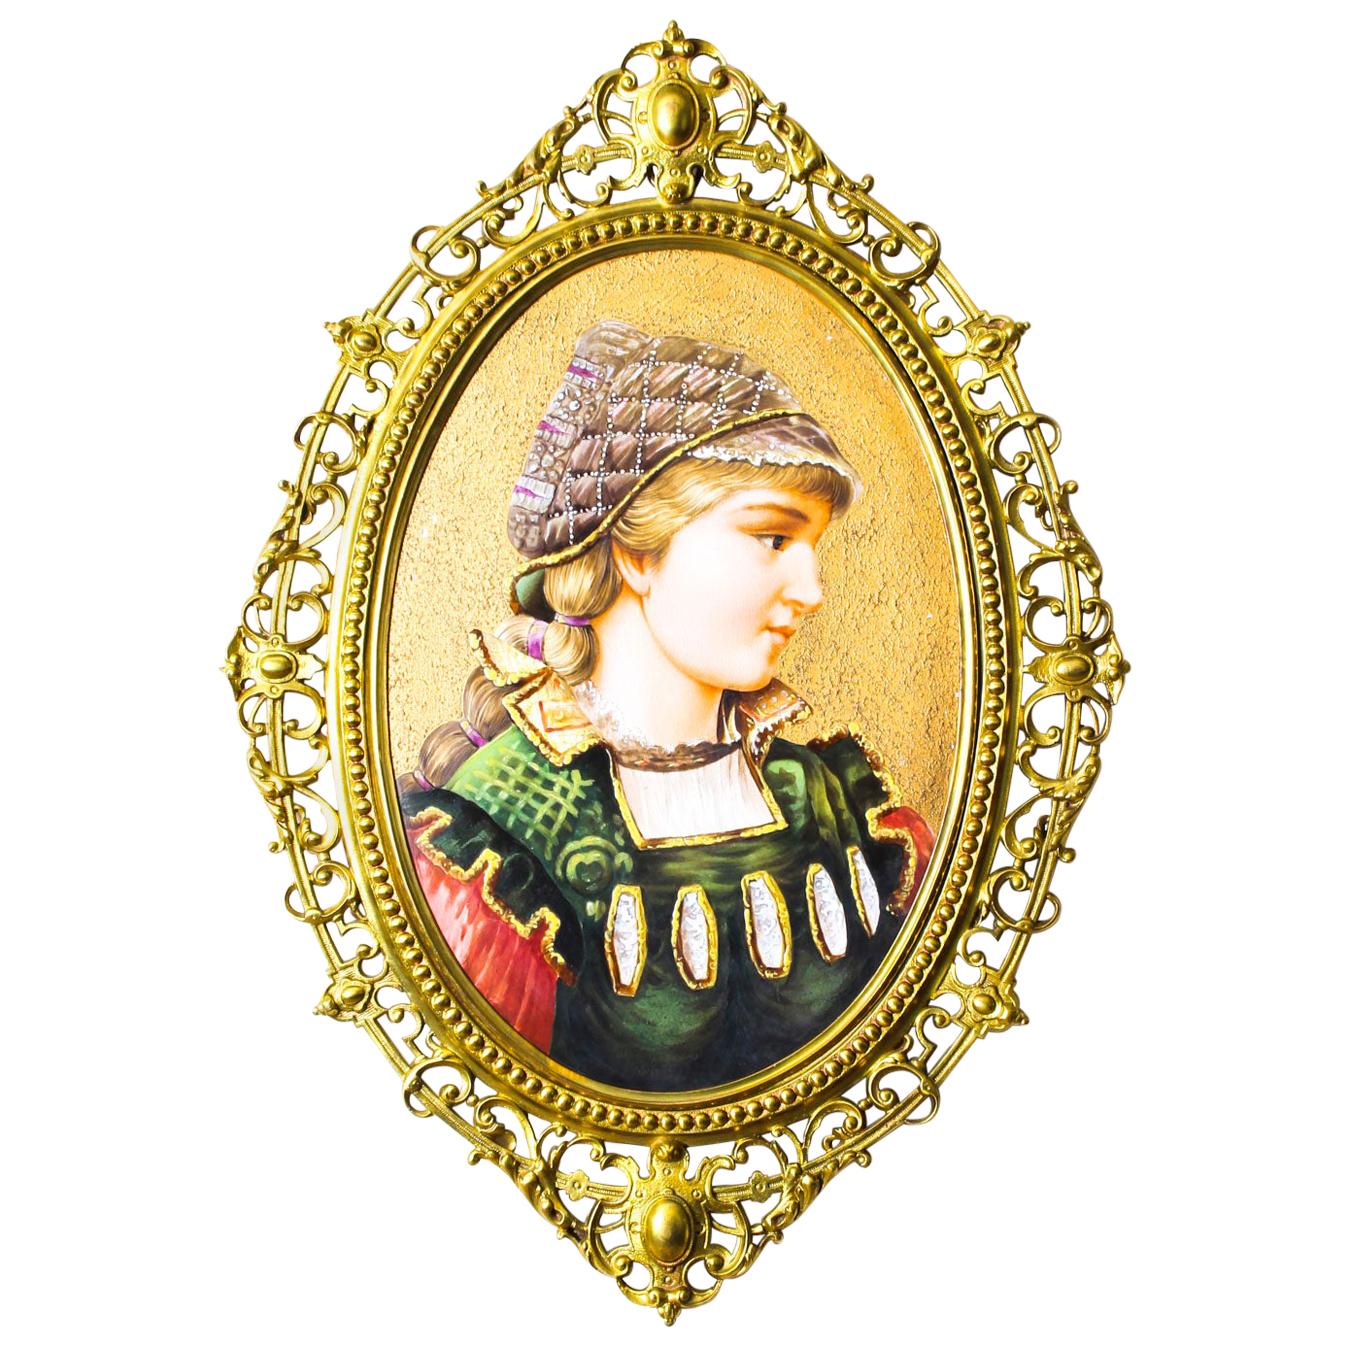 Antique Berlin Oval Porcelain Plaque Young Woman Ormolu Frame, 19th Century